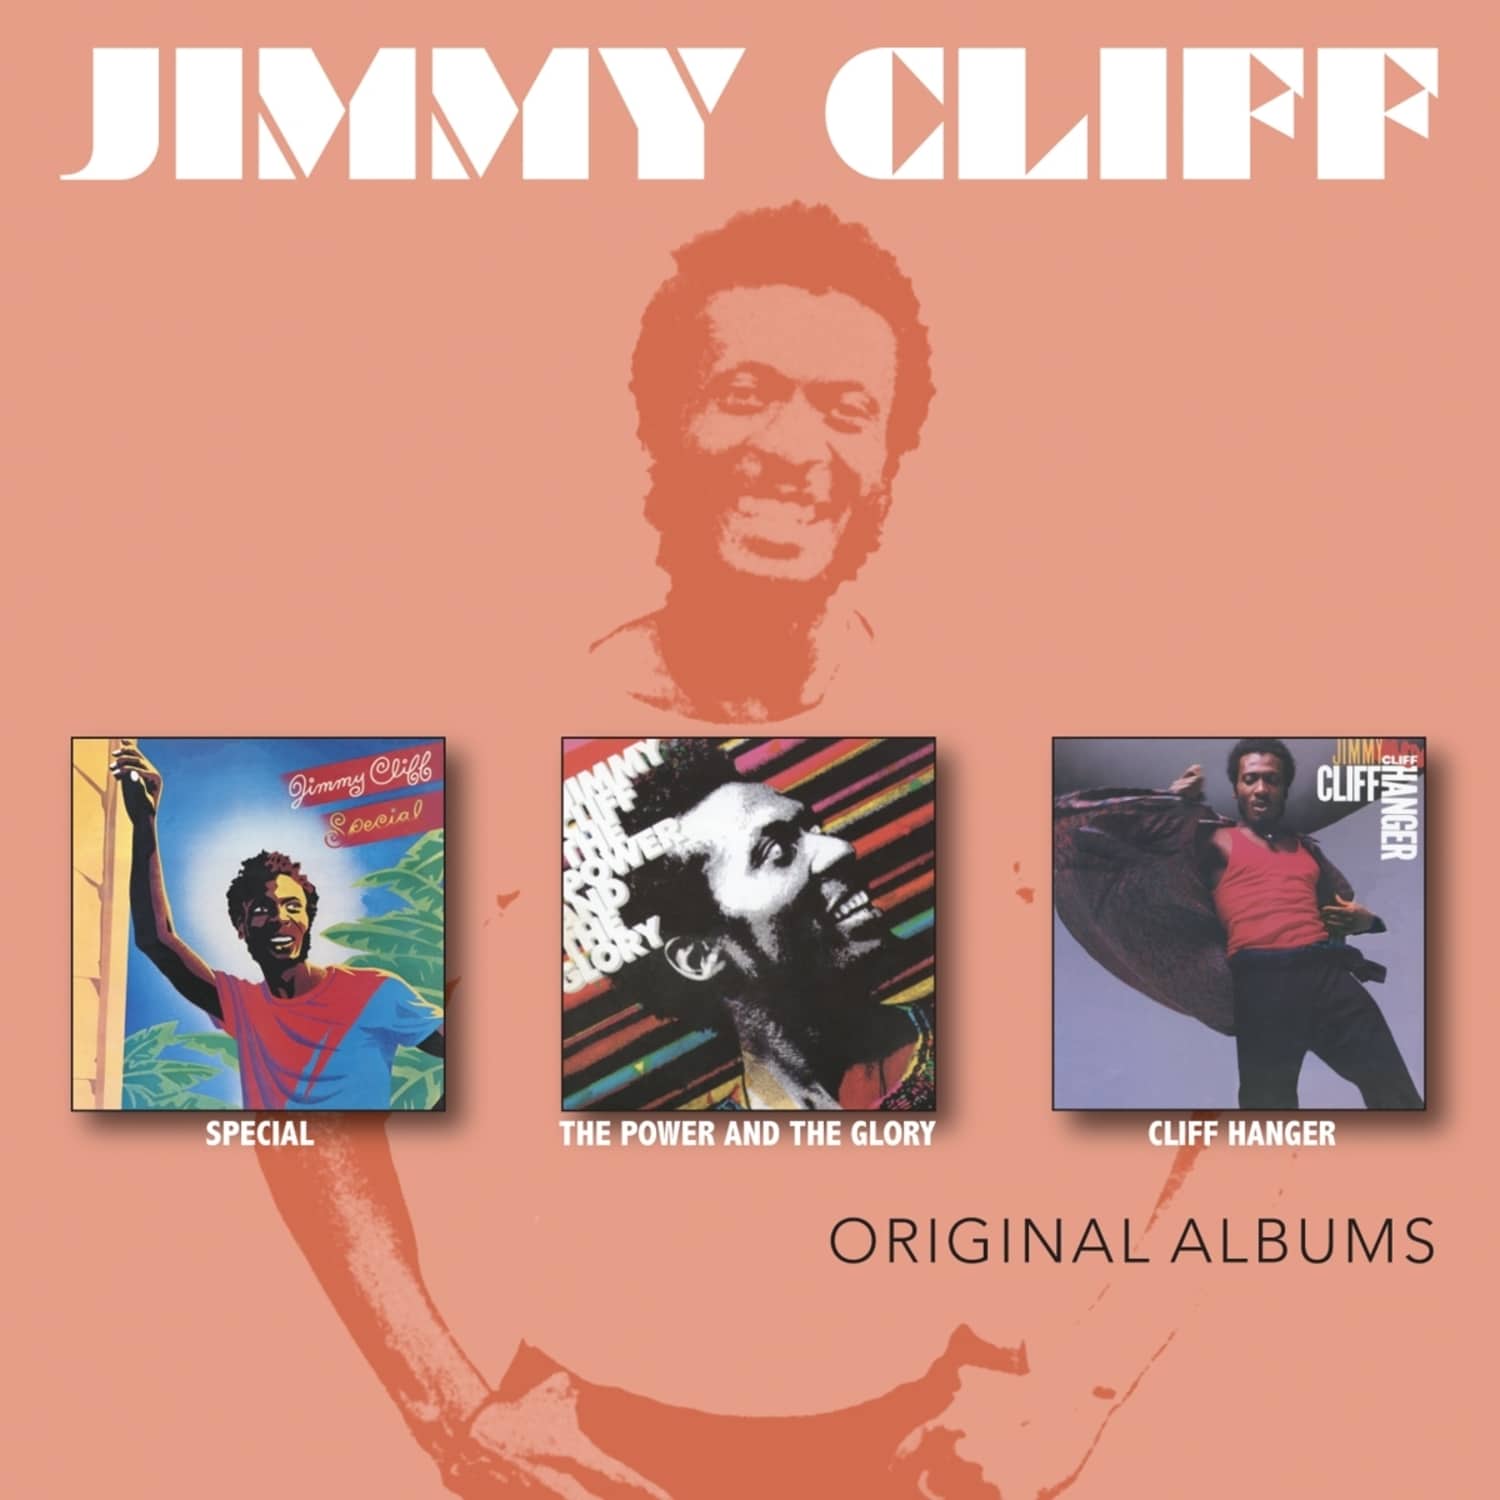 Jimmy Cliff - SPECIAL / THE POWER AND THE GLORY / CLIFF HANGER 